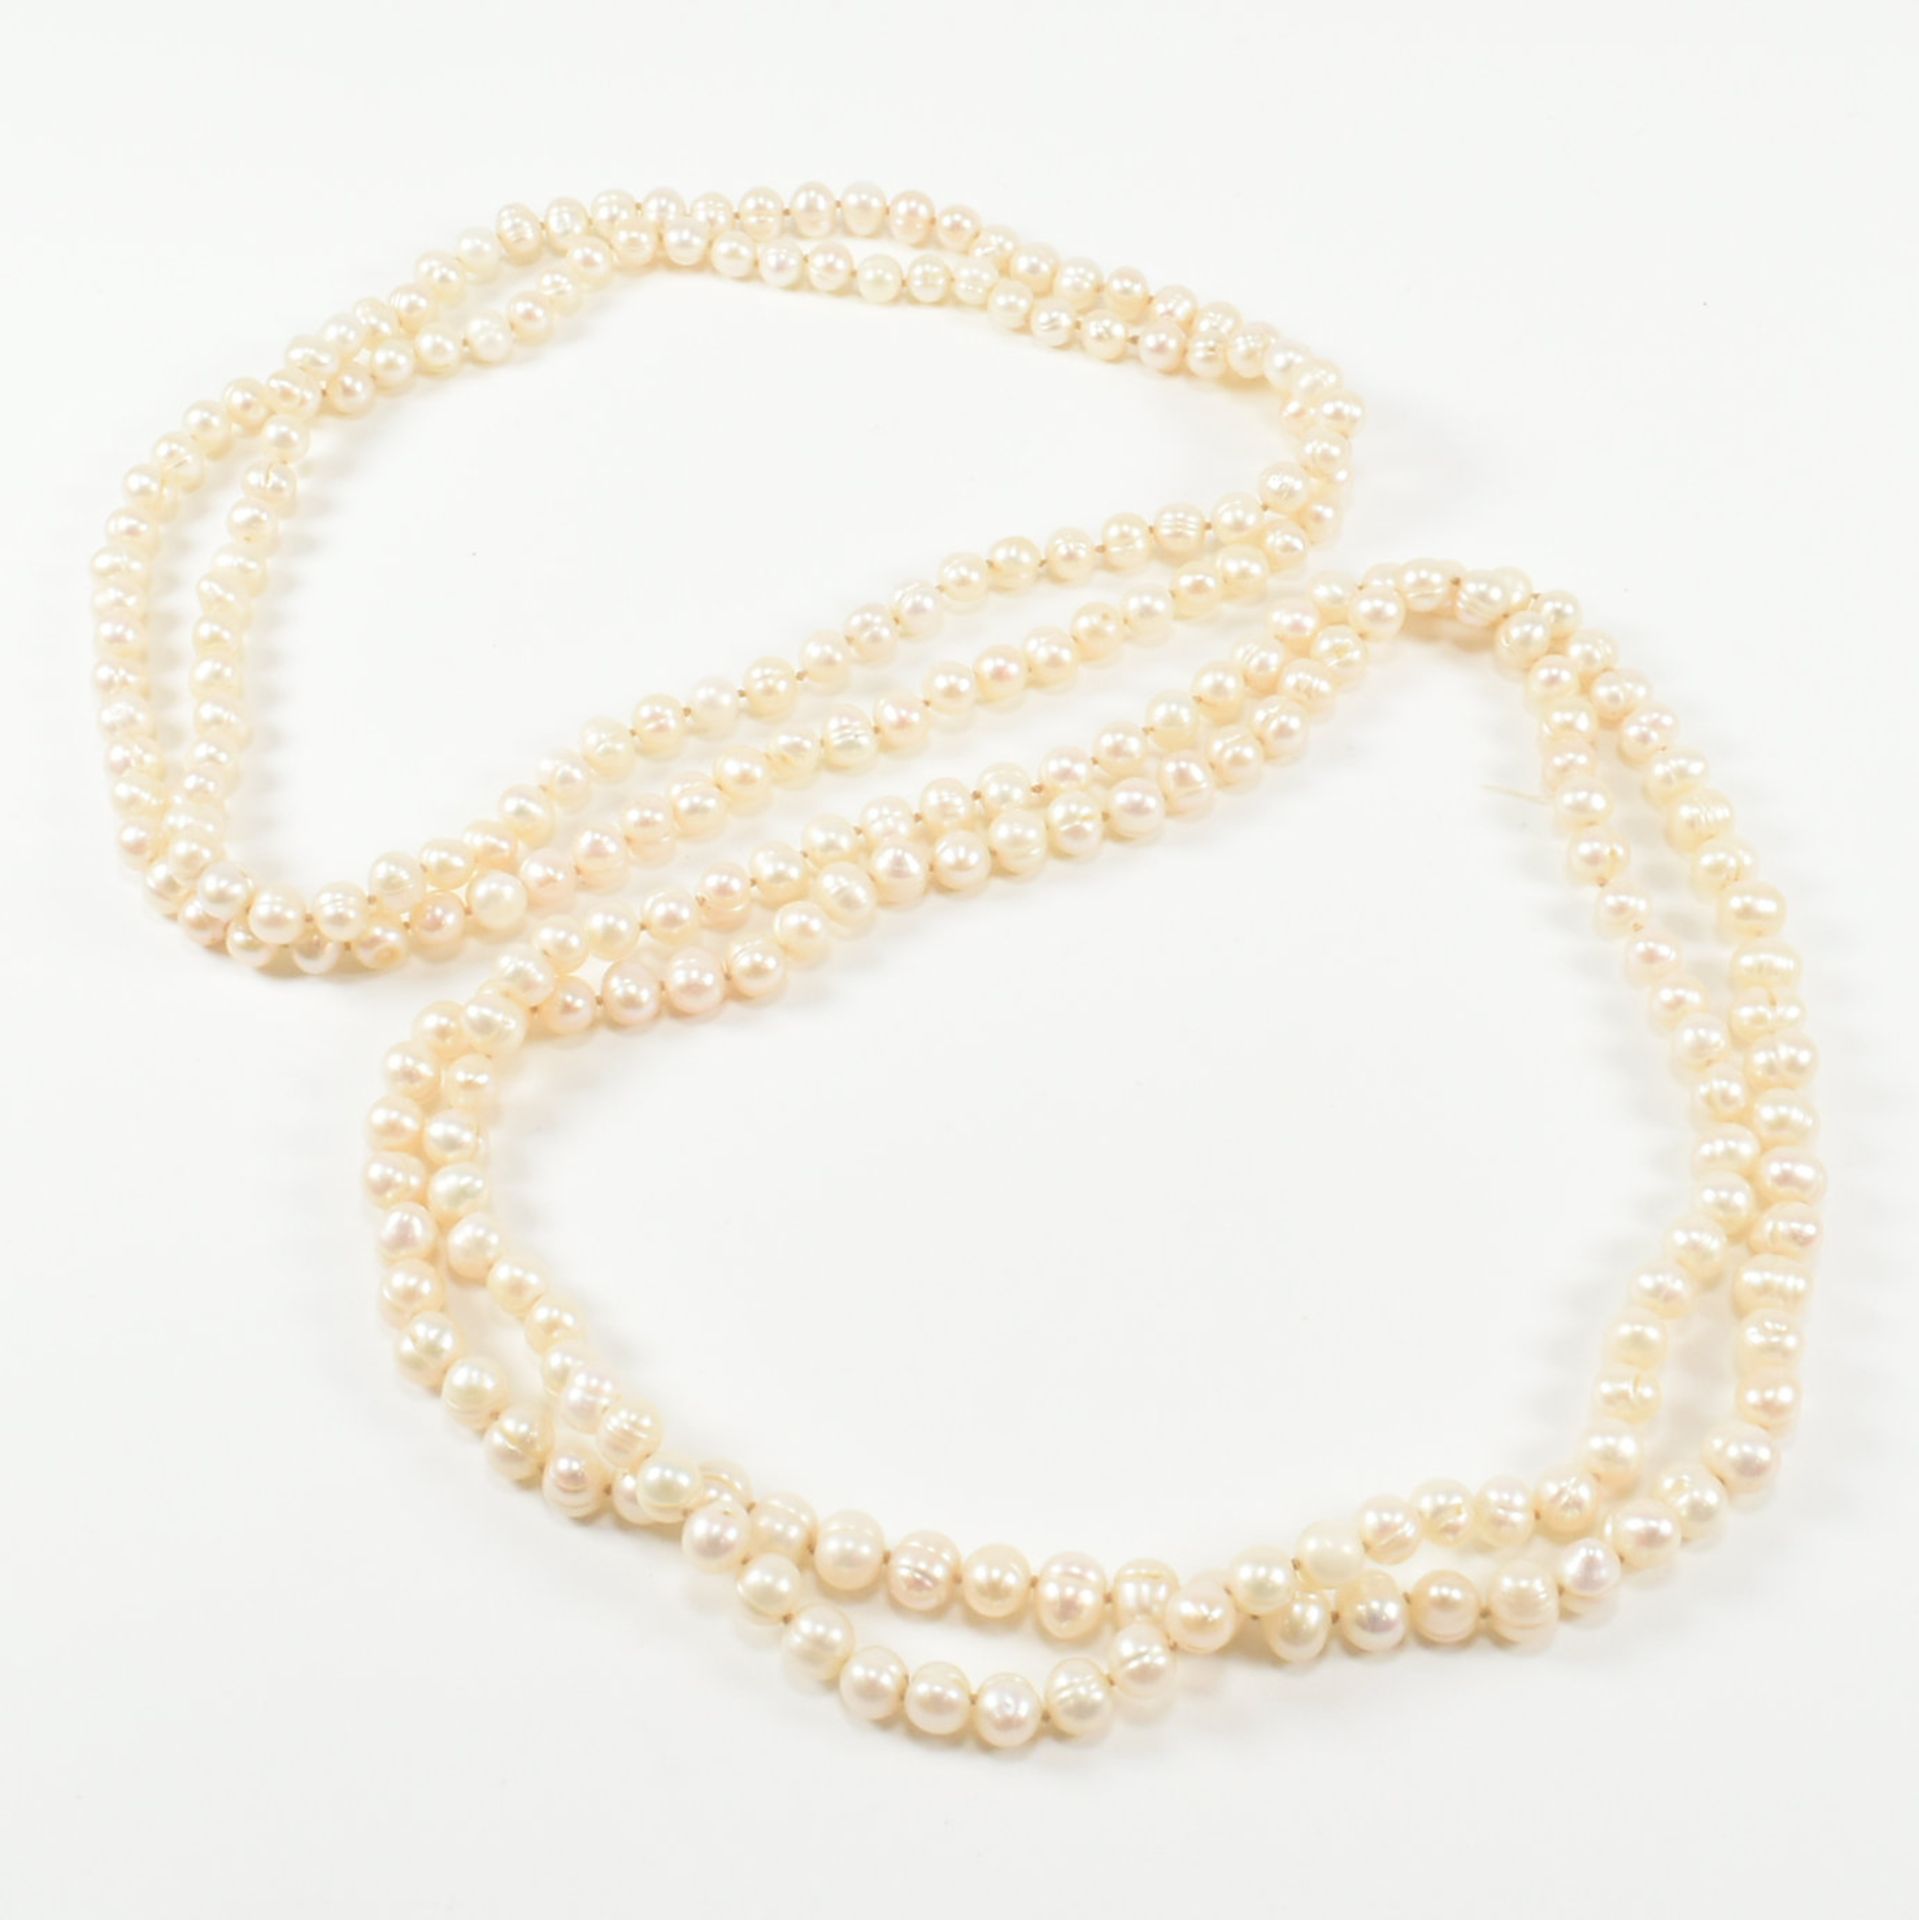 TWO STRING OF CULTURED BAROQUE PEARLS - Image 5 of 6